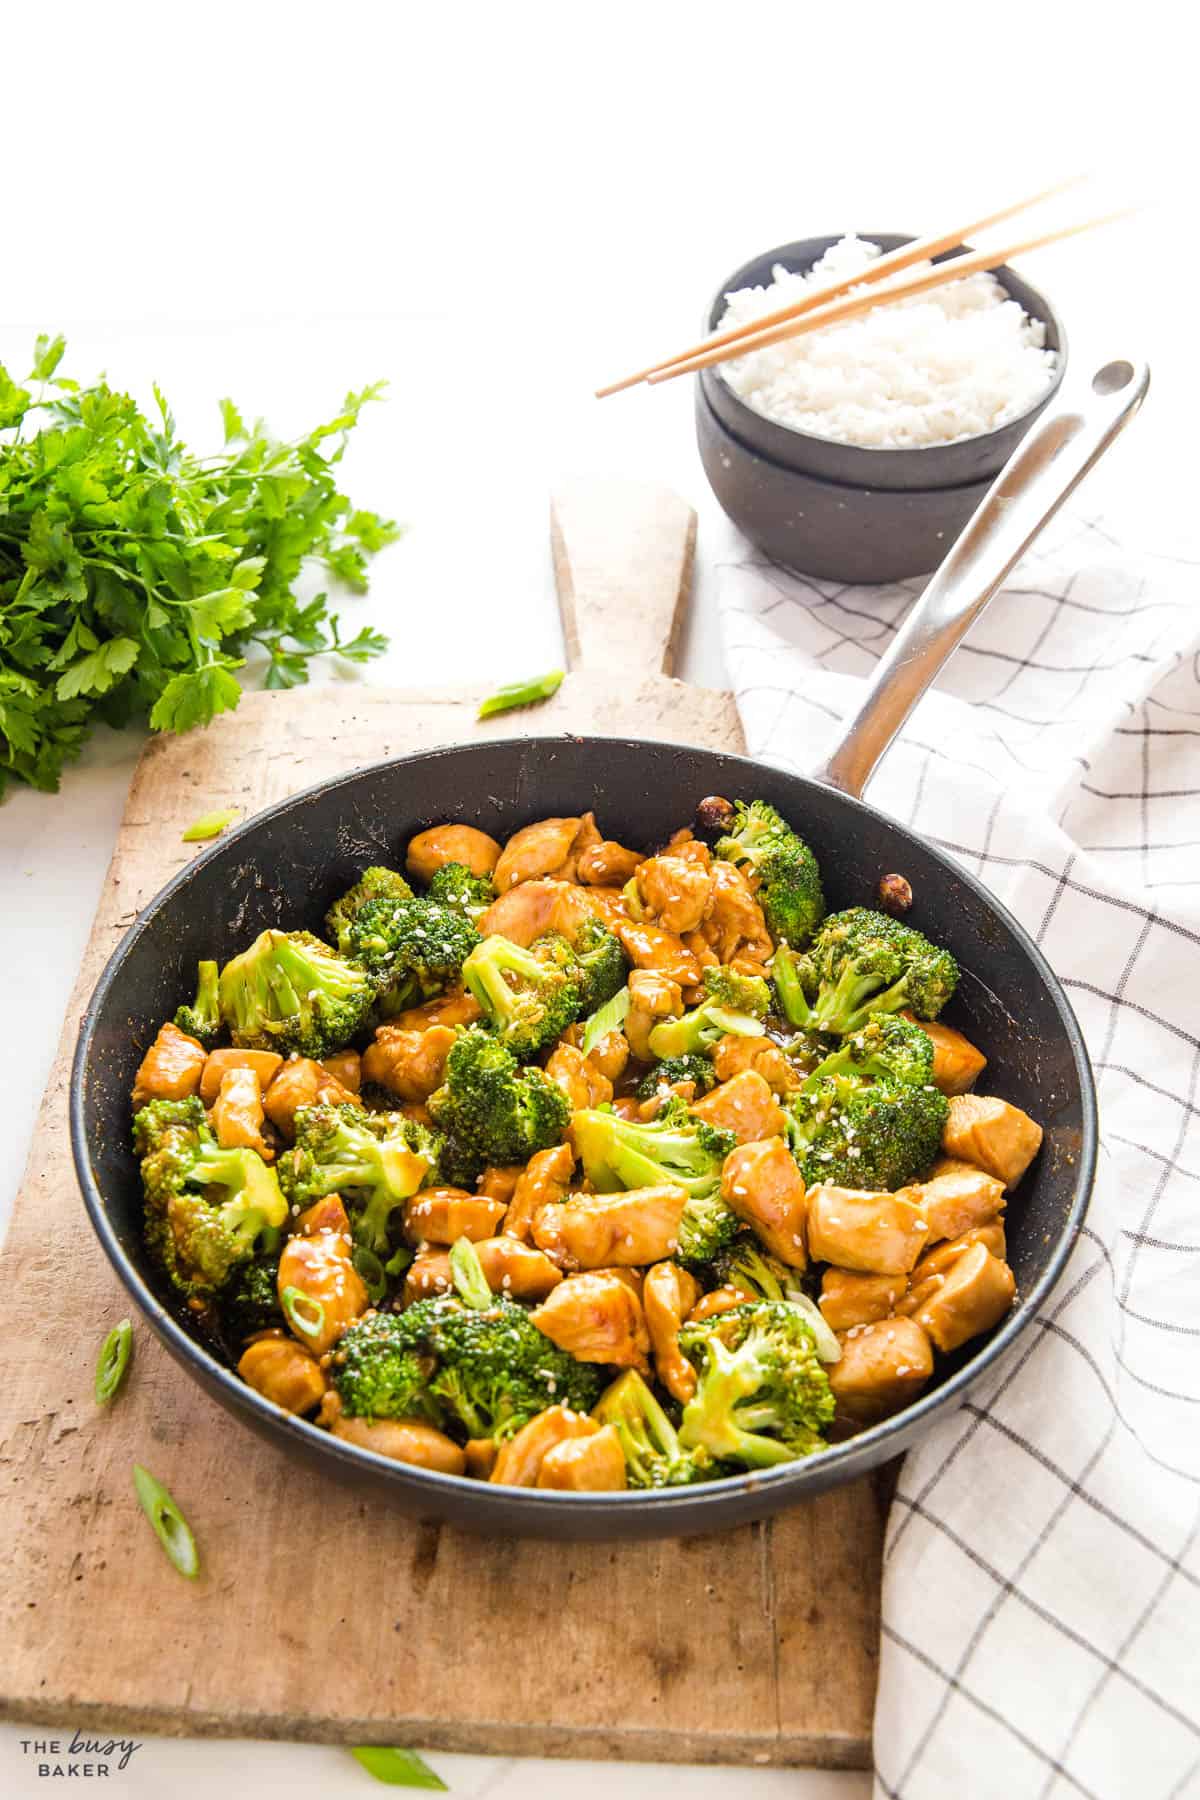 Asian take out style recipe with veggies